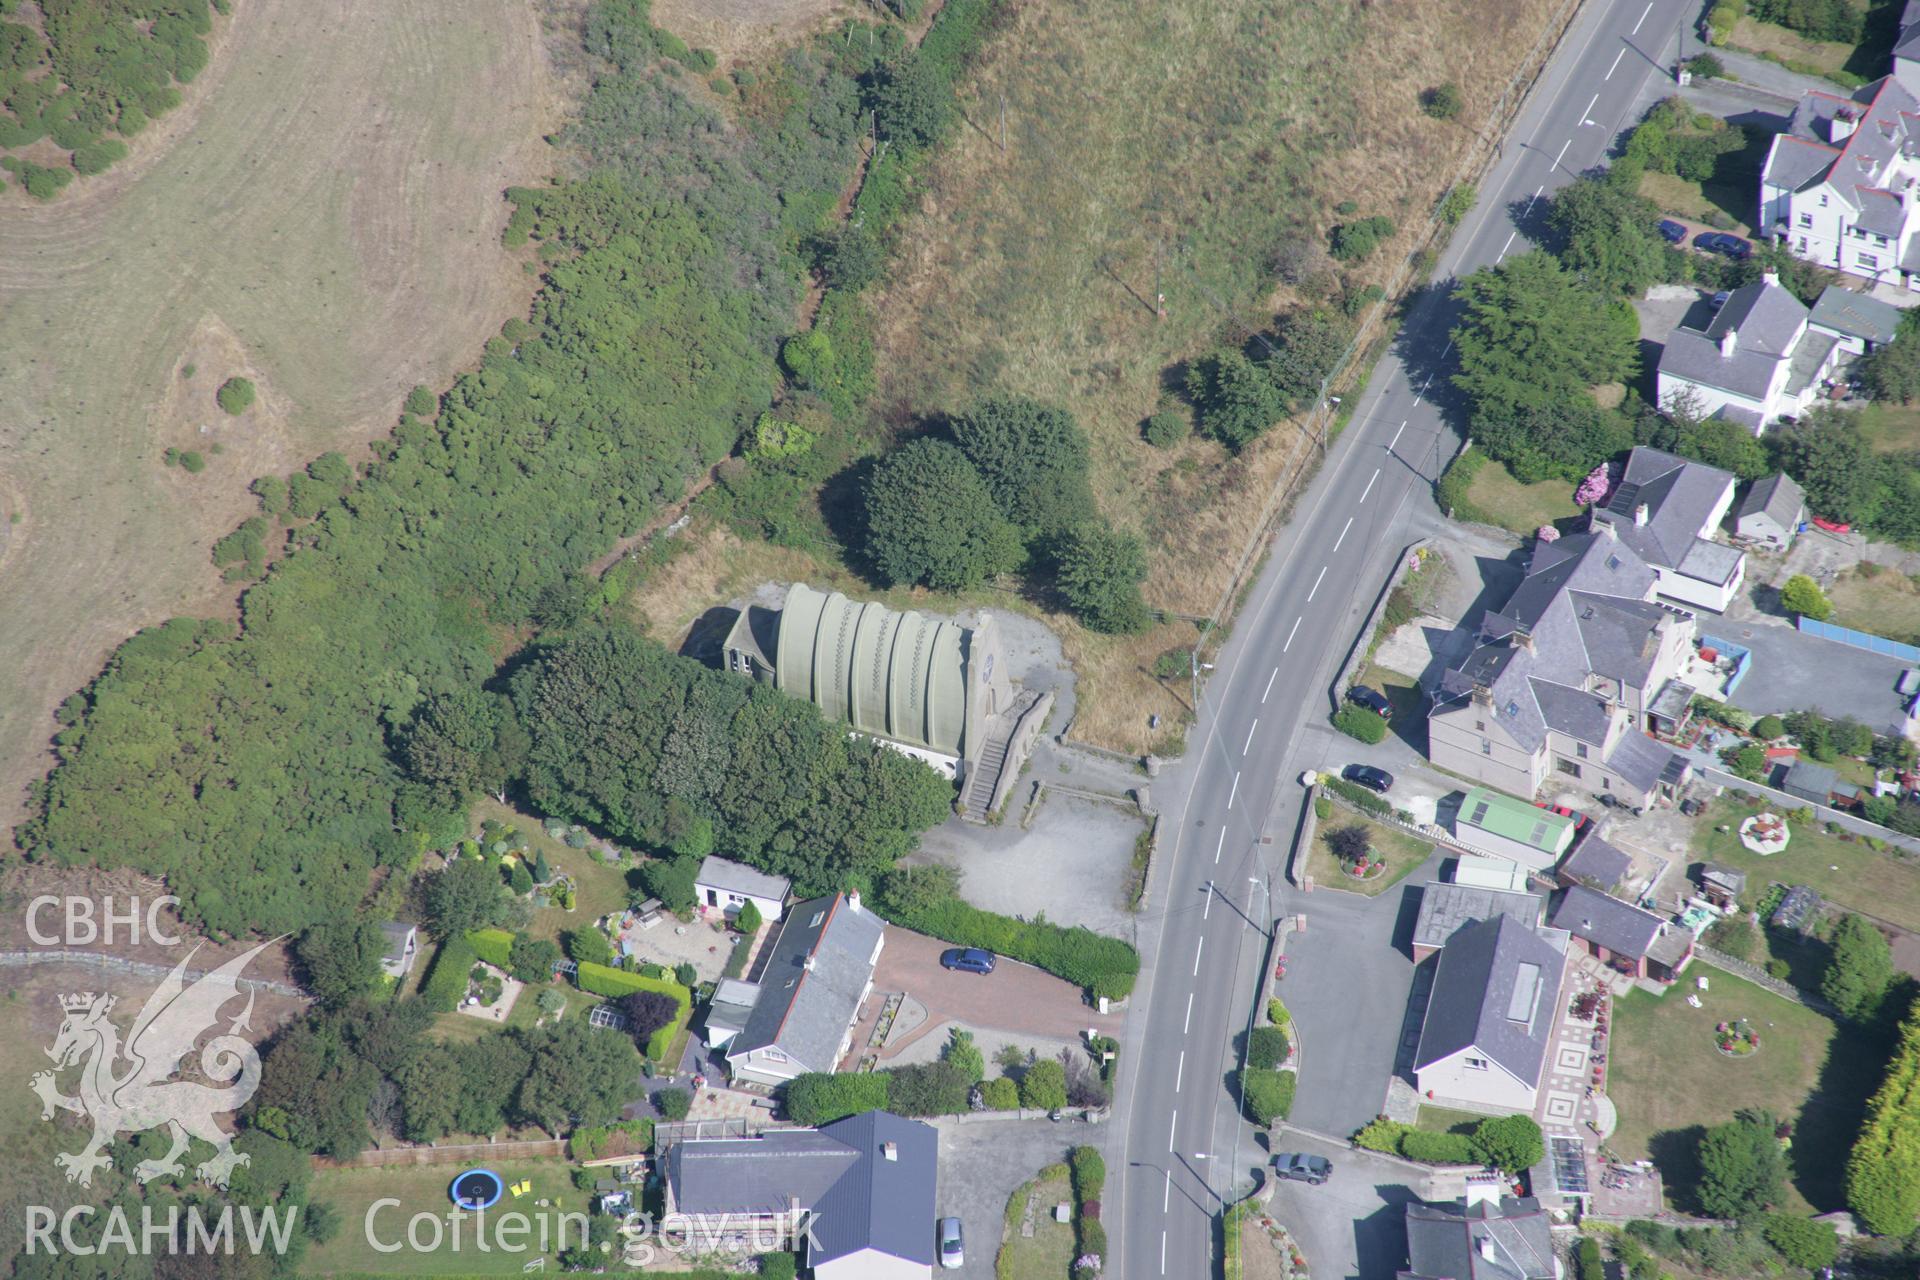 RCAHMW colour oblique aerial photograph of Church of Our Lady Star of The Sea, Amlwch. Taken on 14 August 2006 by Toby Driver.